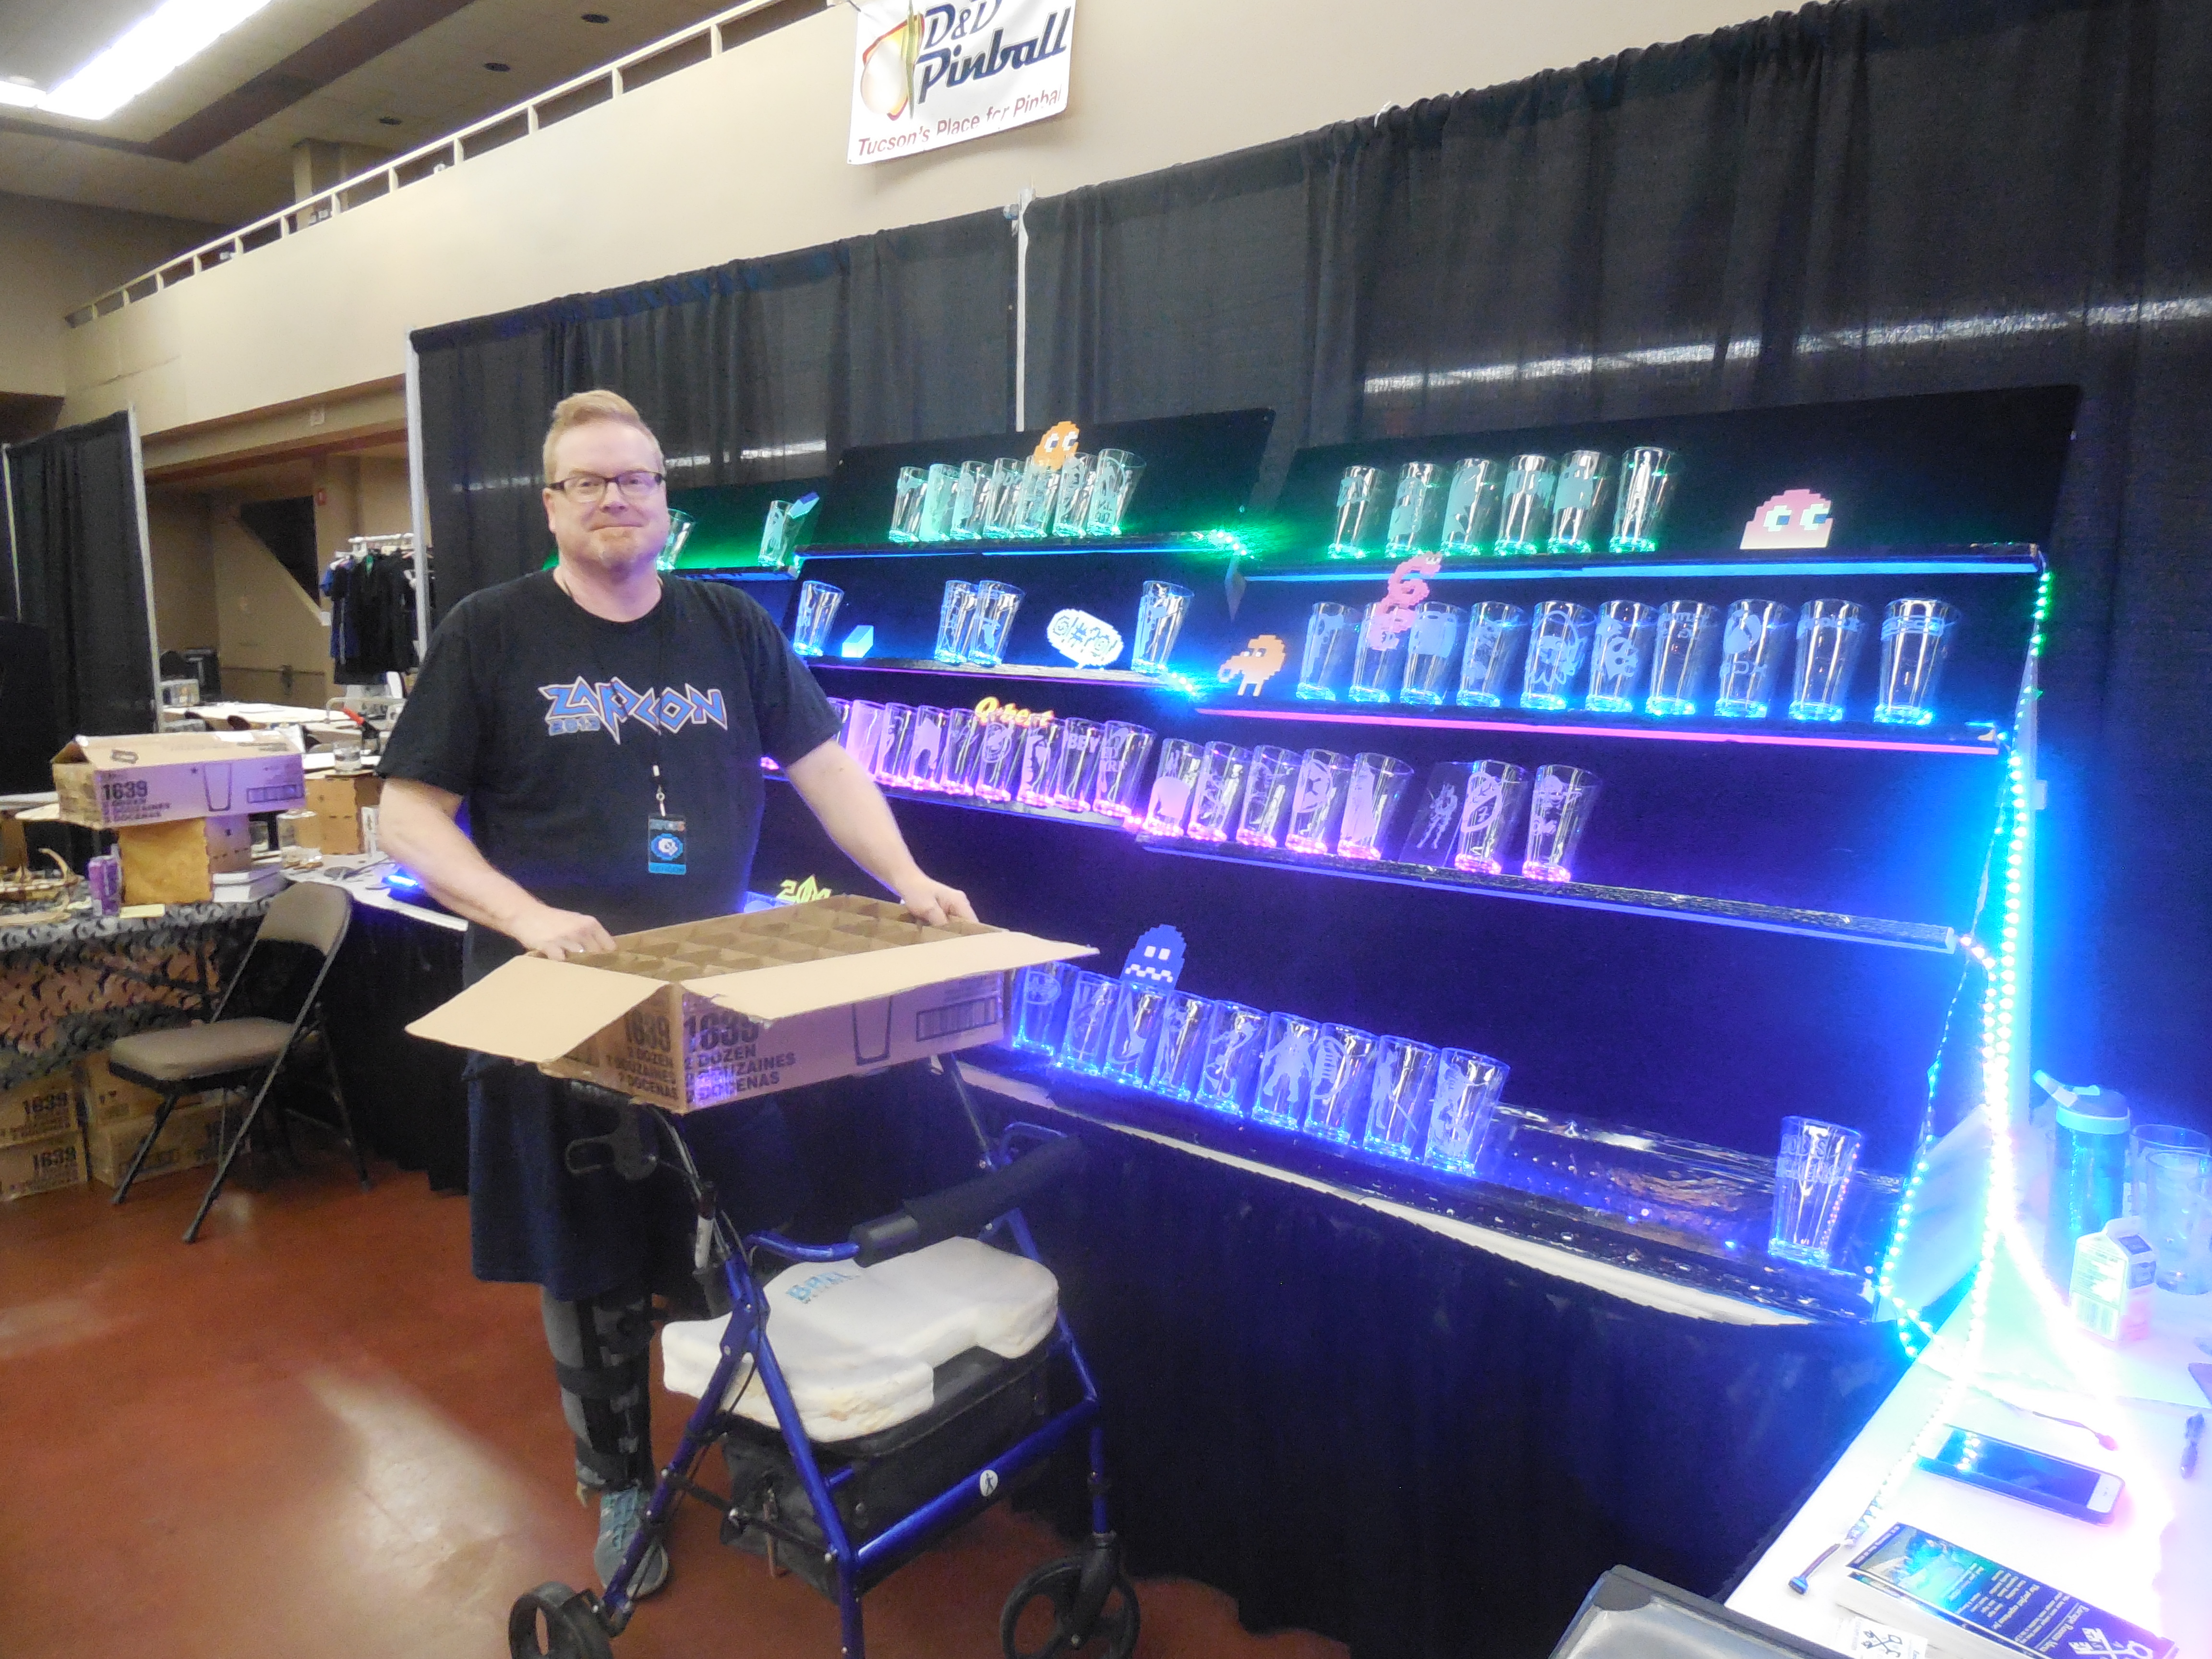 Vendors also were setting up bright and early. Here's our good friend Moto with his awesome etched glasses.